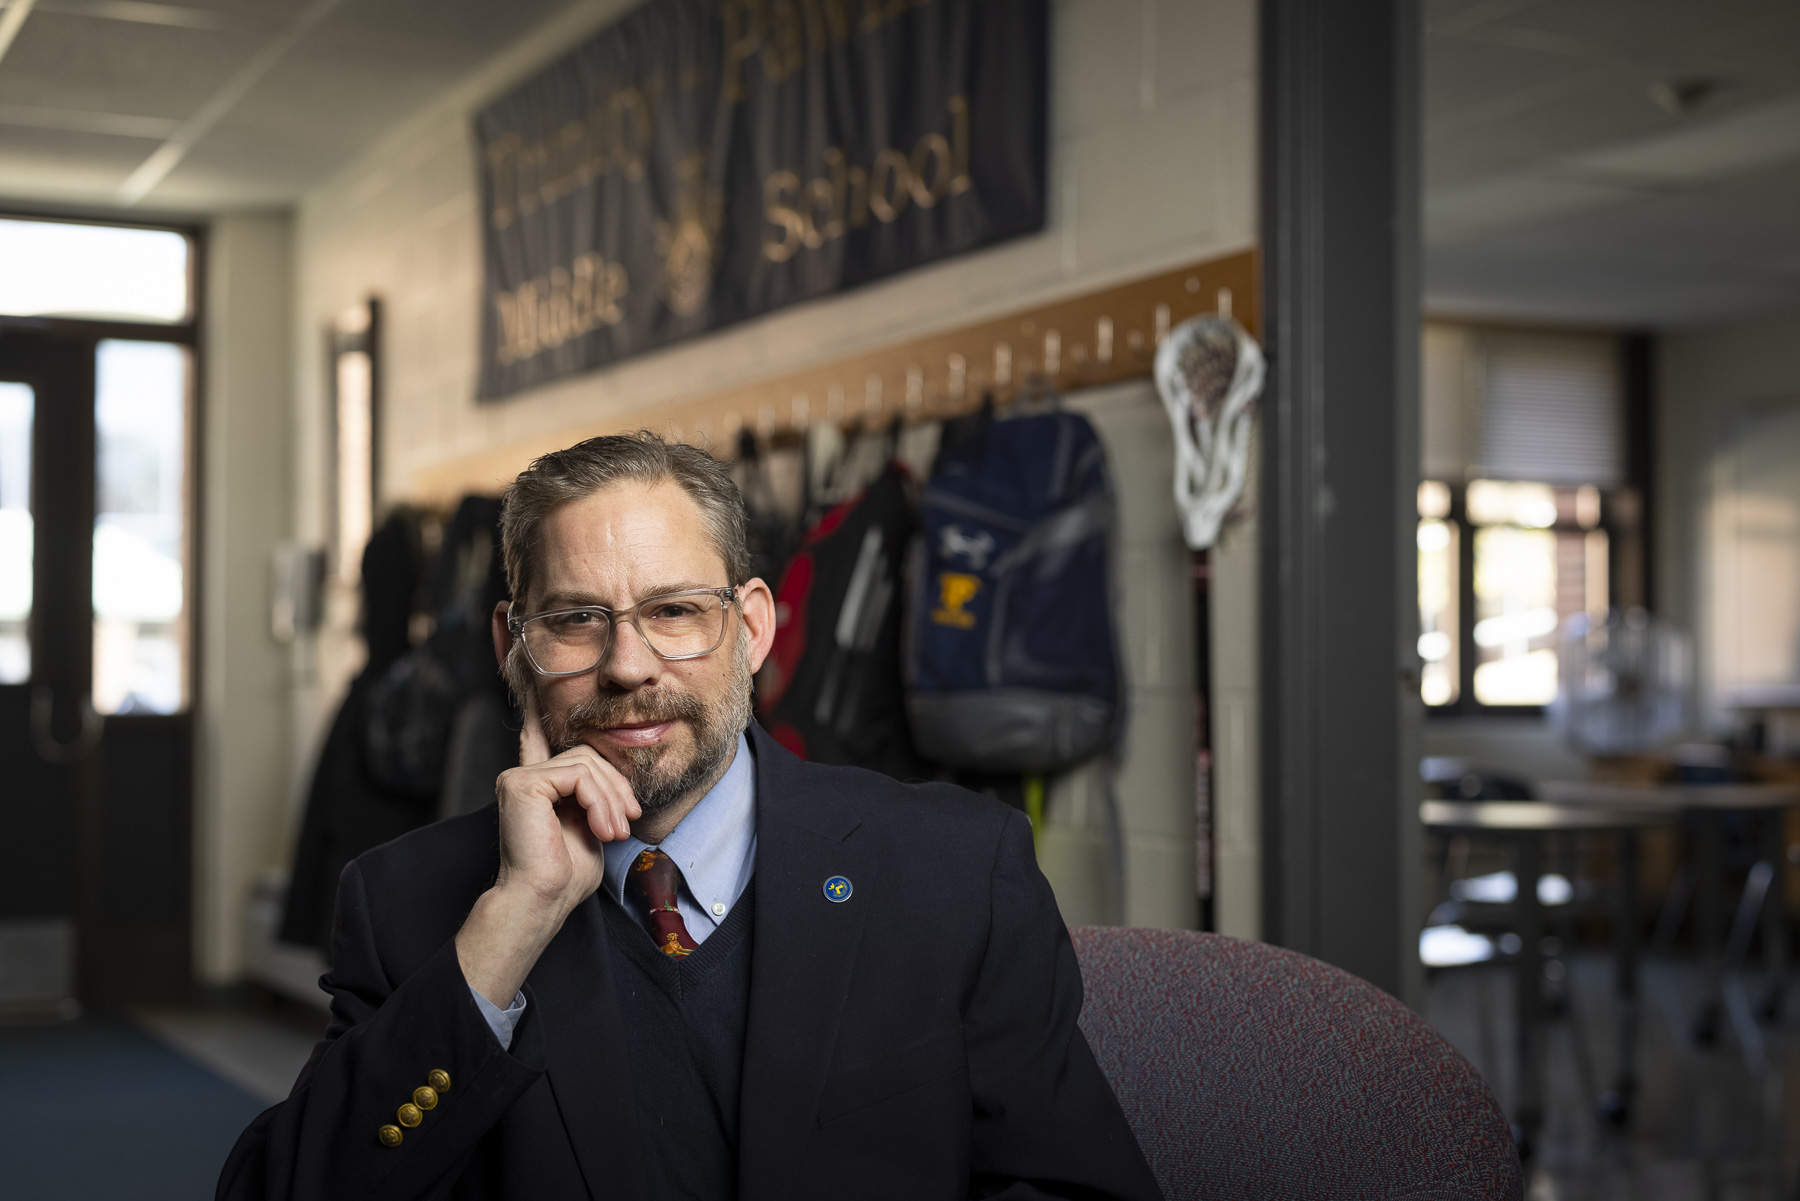 Trinity-Pawling faculty member Todd Hoffman